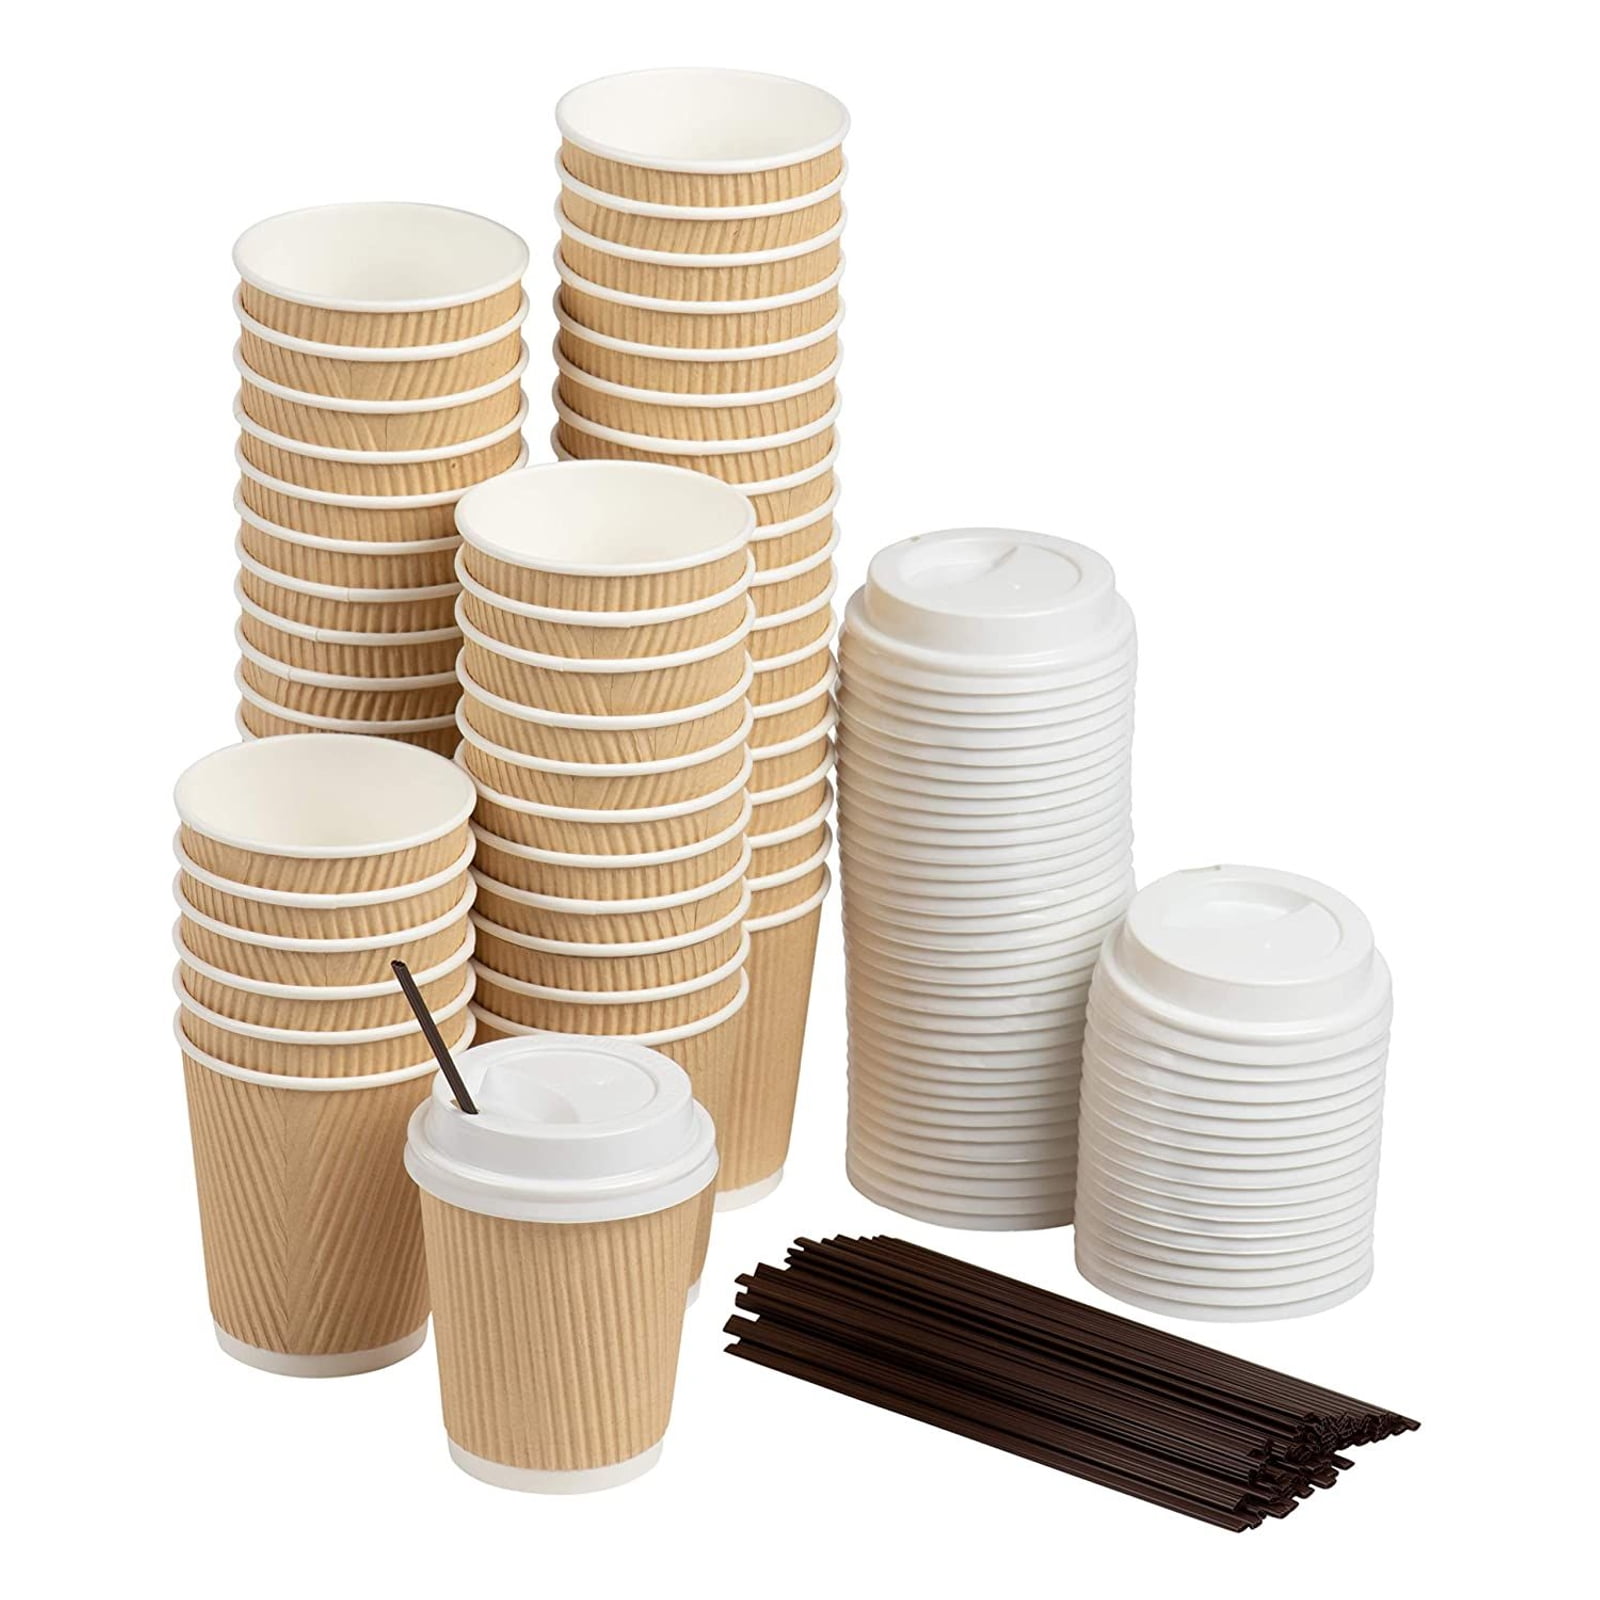 Black Disposable Ripple Wall Coffee Cups & Sip Lids!Paper/Tea/Hot/Insulated 